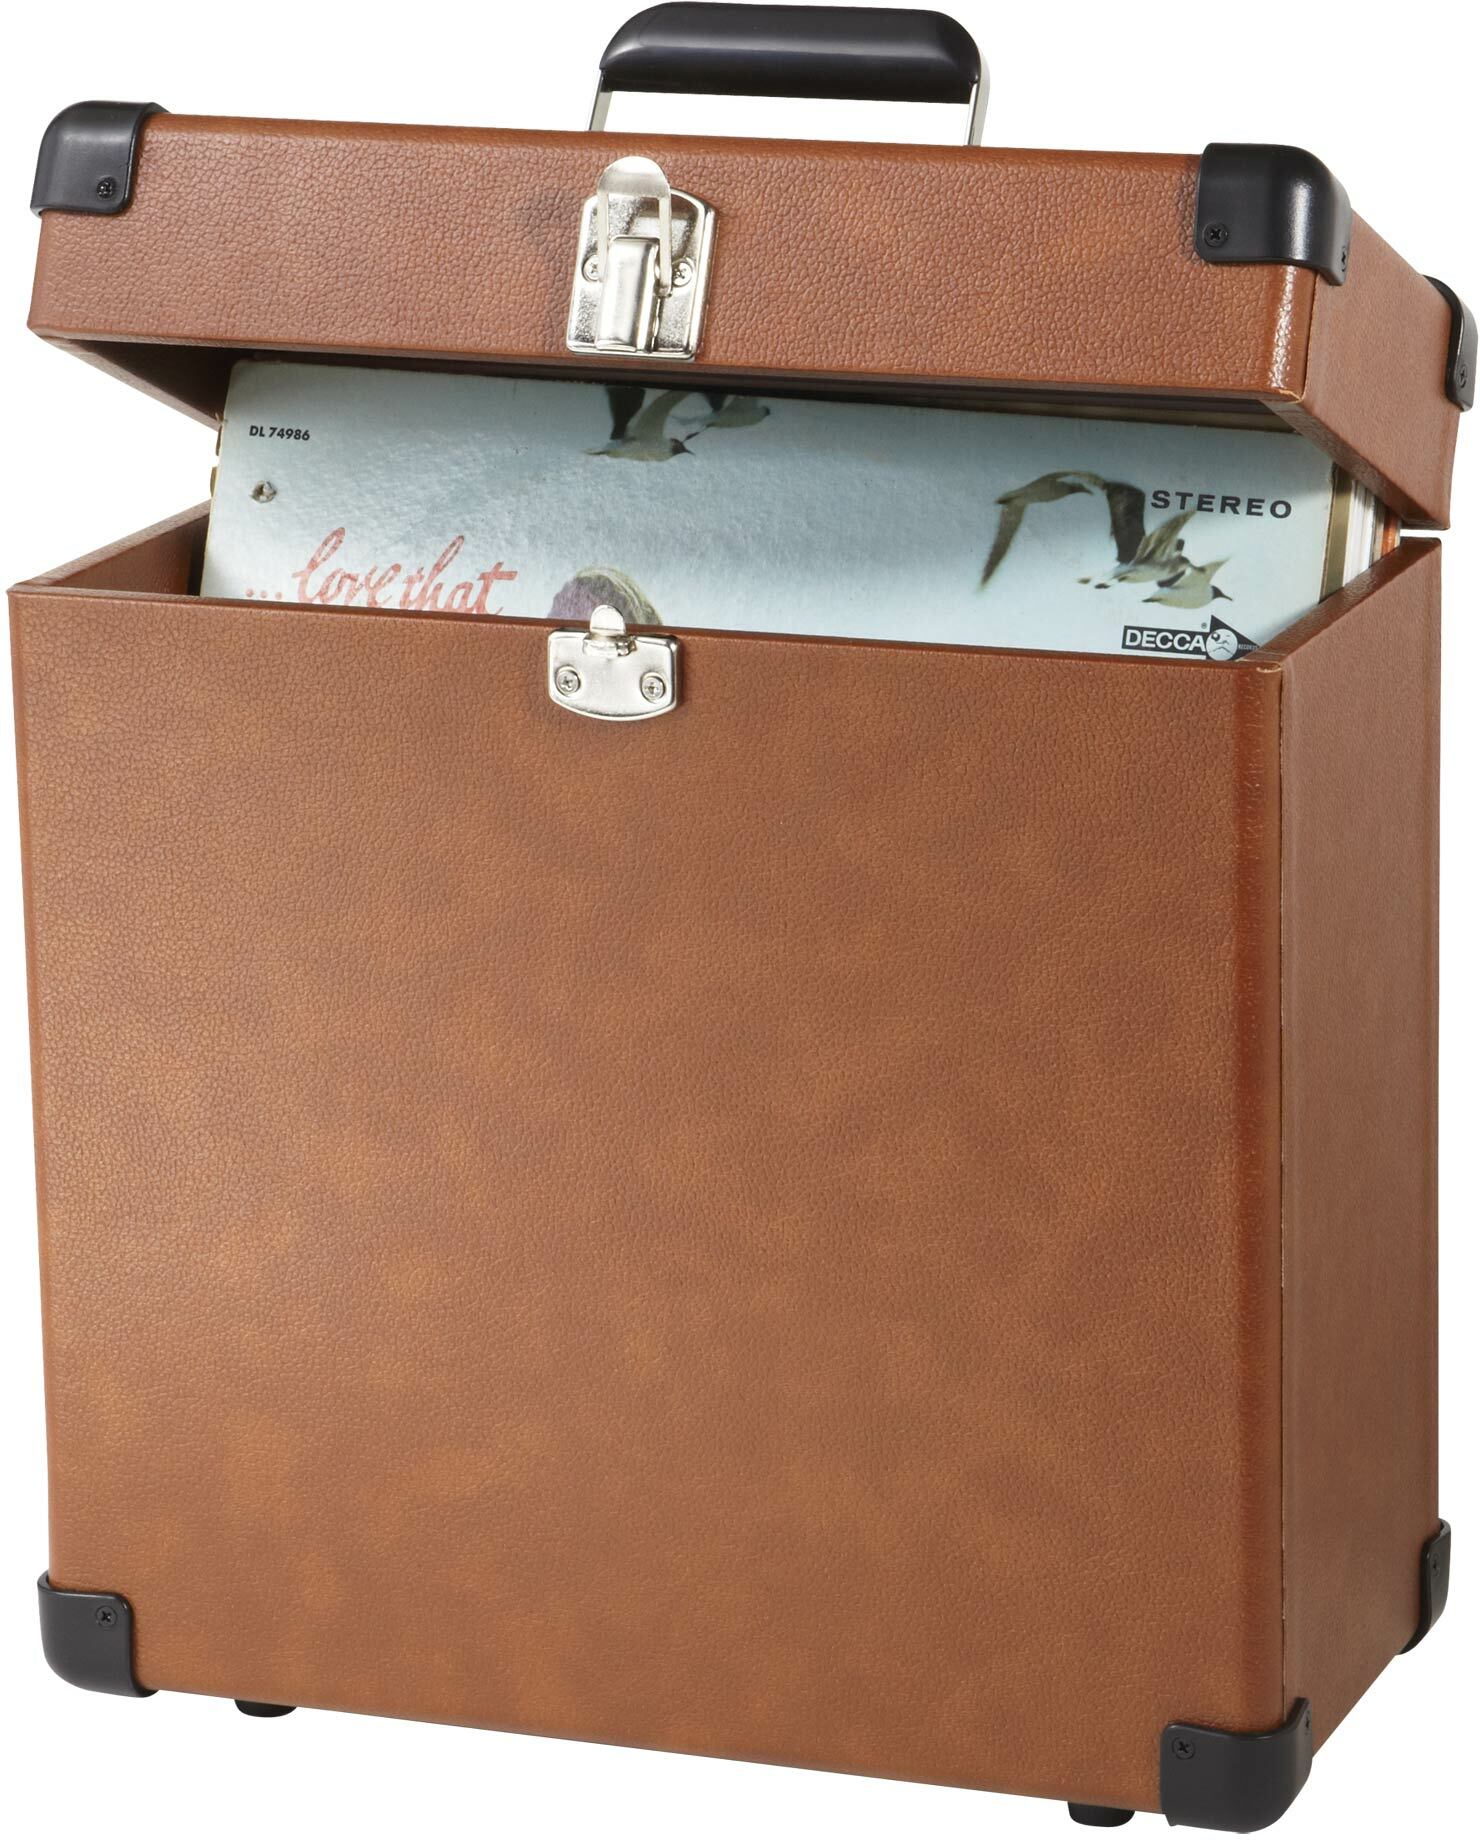 Crosley Record Carrier Case - Muebles DJ - Main picture